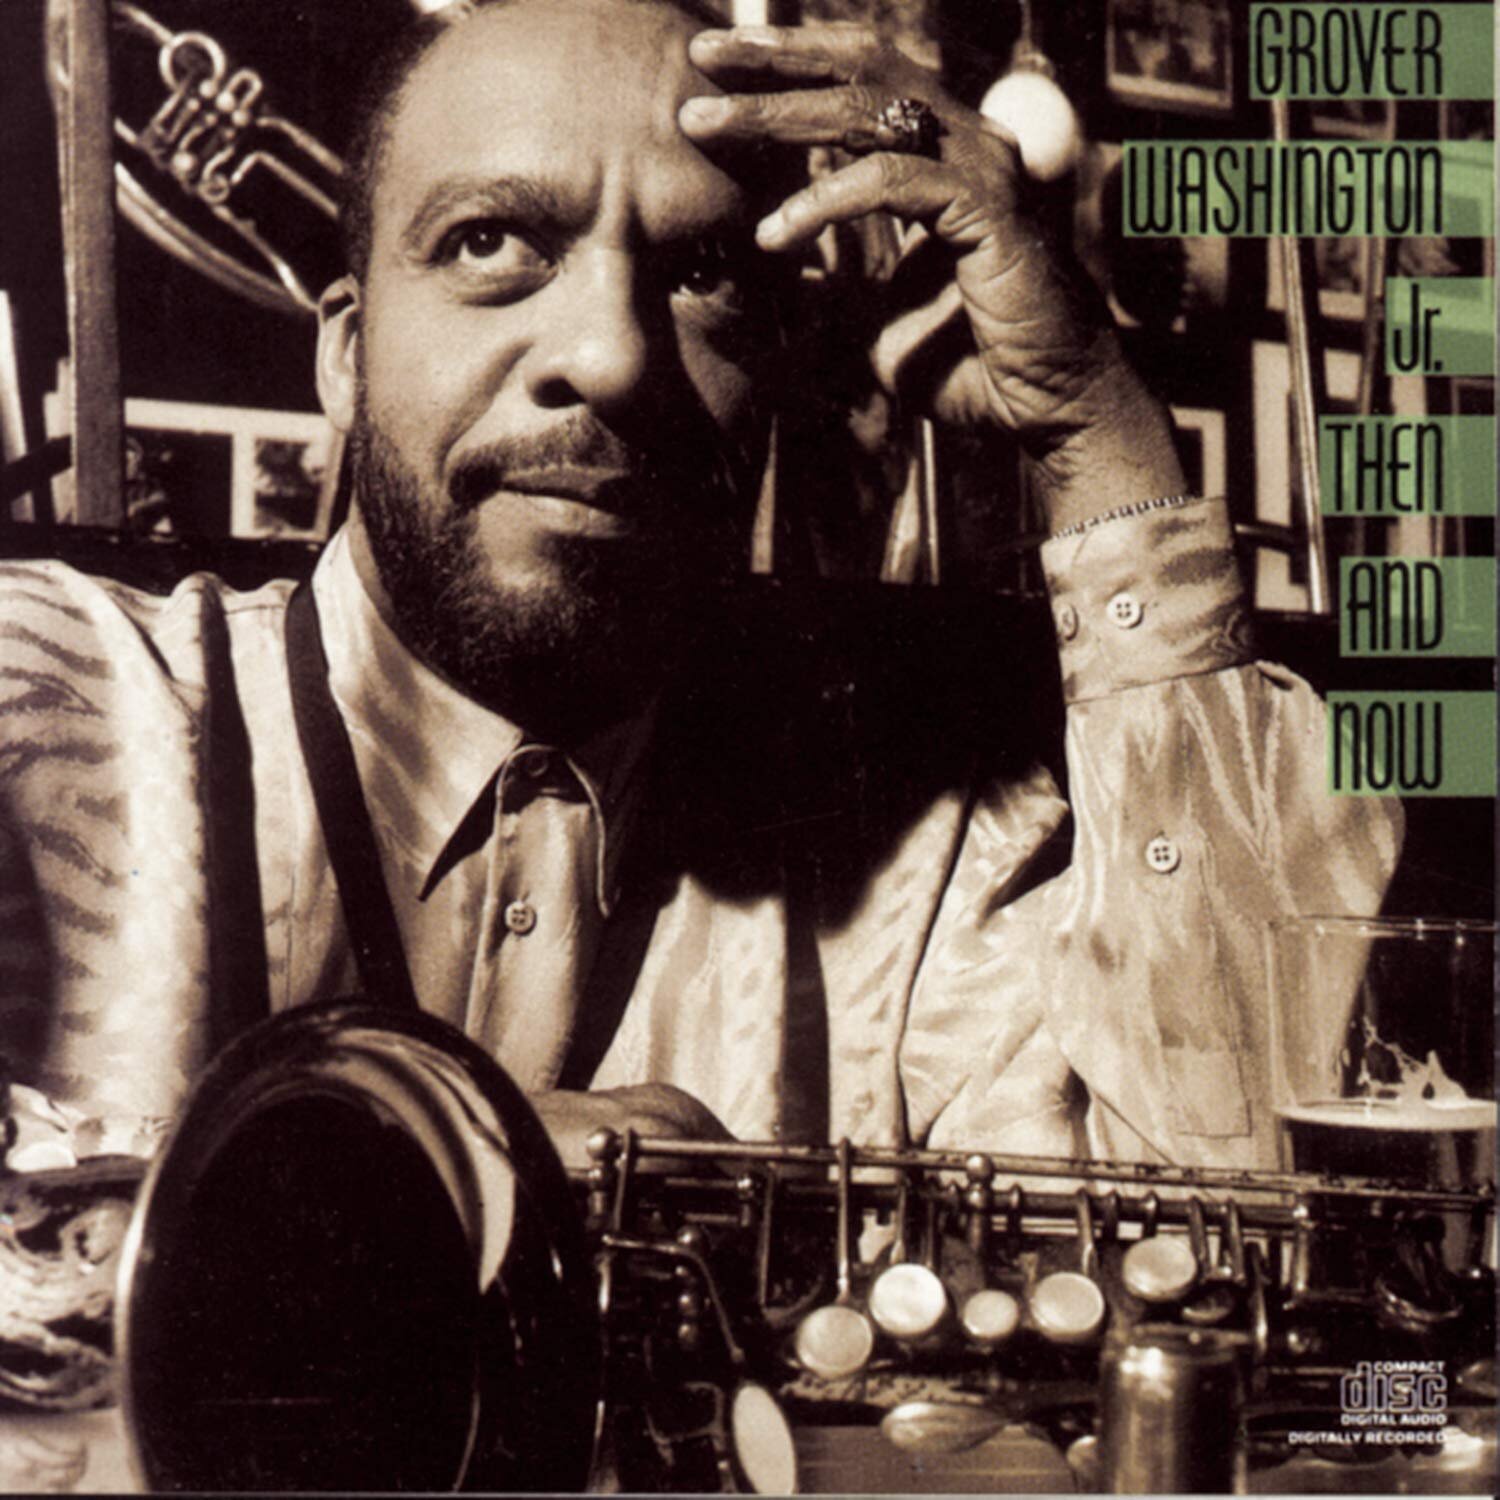 (38) Now and Then - Grover Washington Jr..jpg